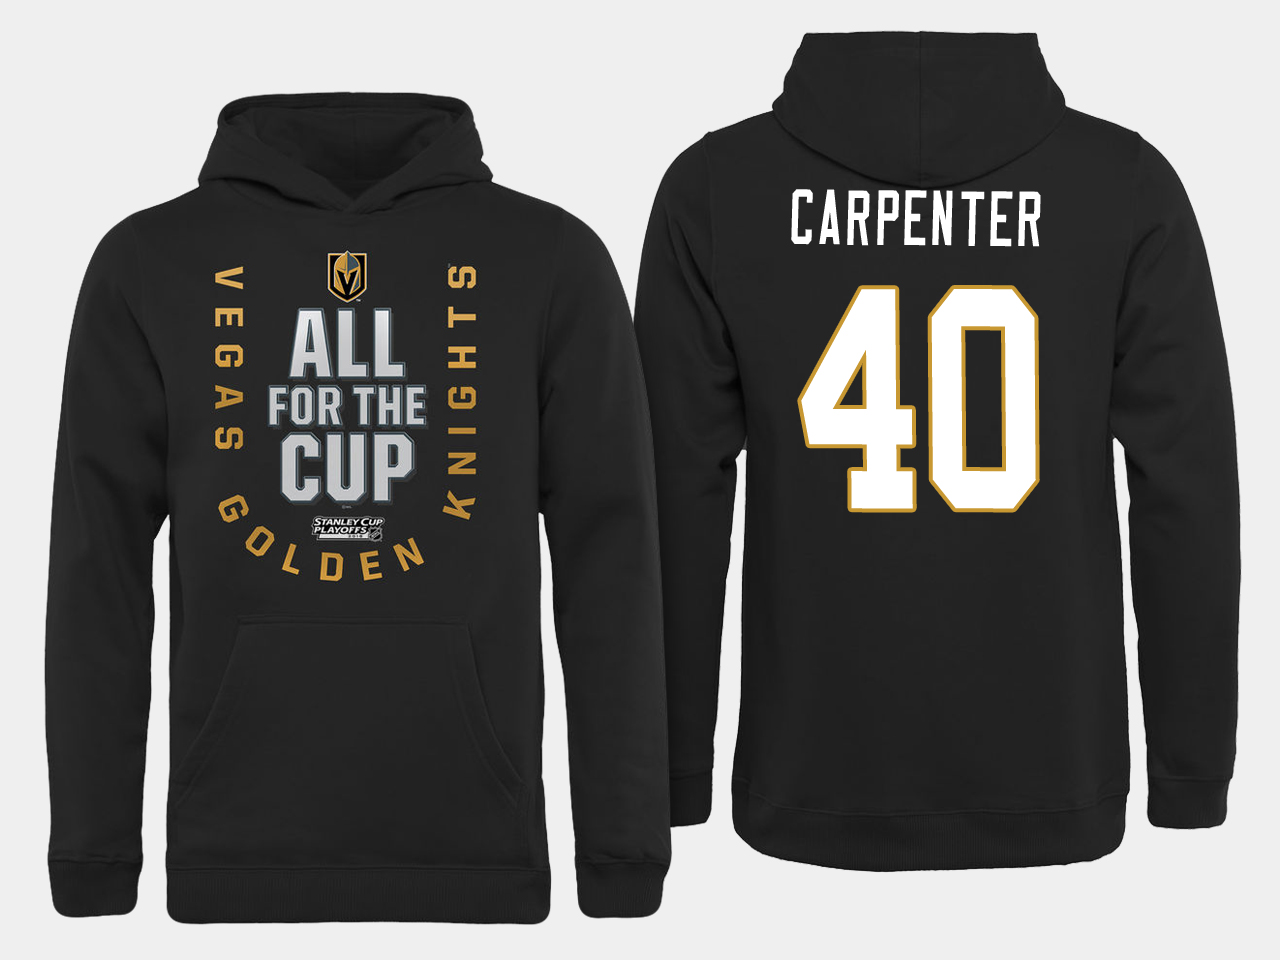 Men NHL Vegas Golden Knights #40 Carpenter All for the Cup hoodie